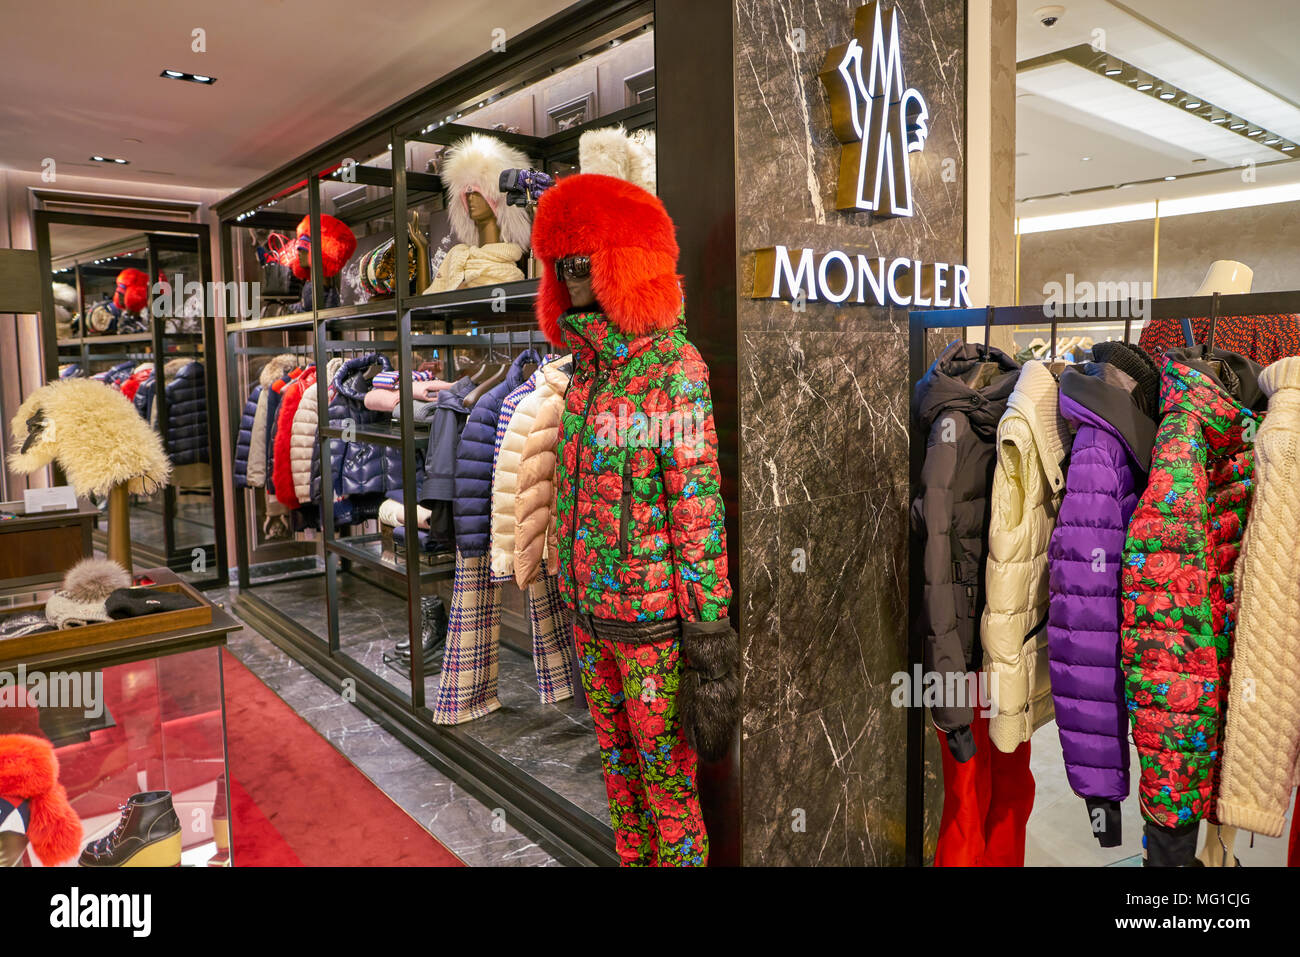 moncler italy